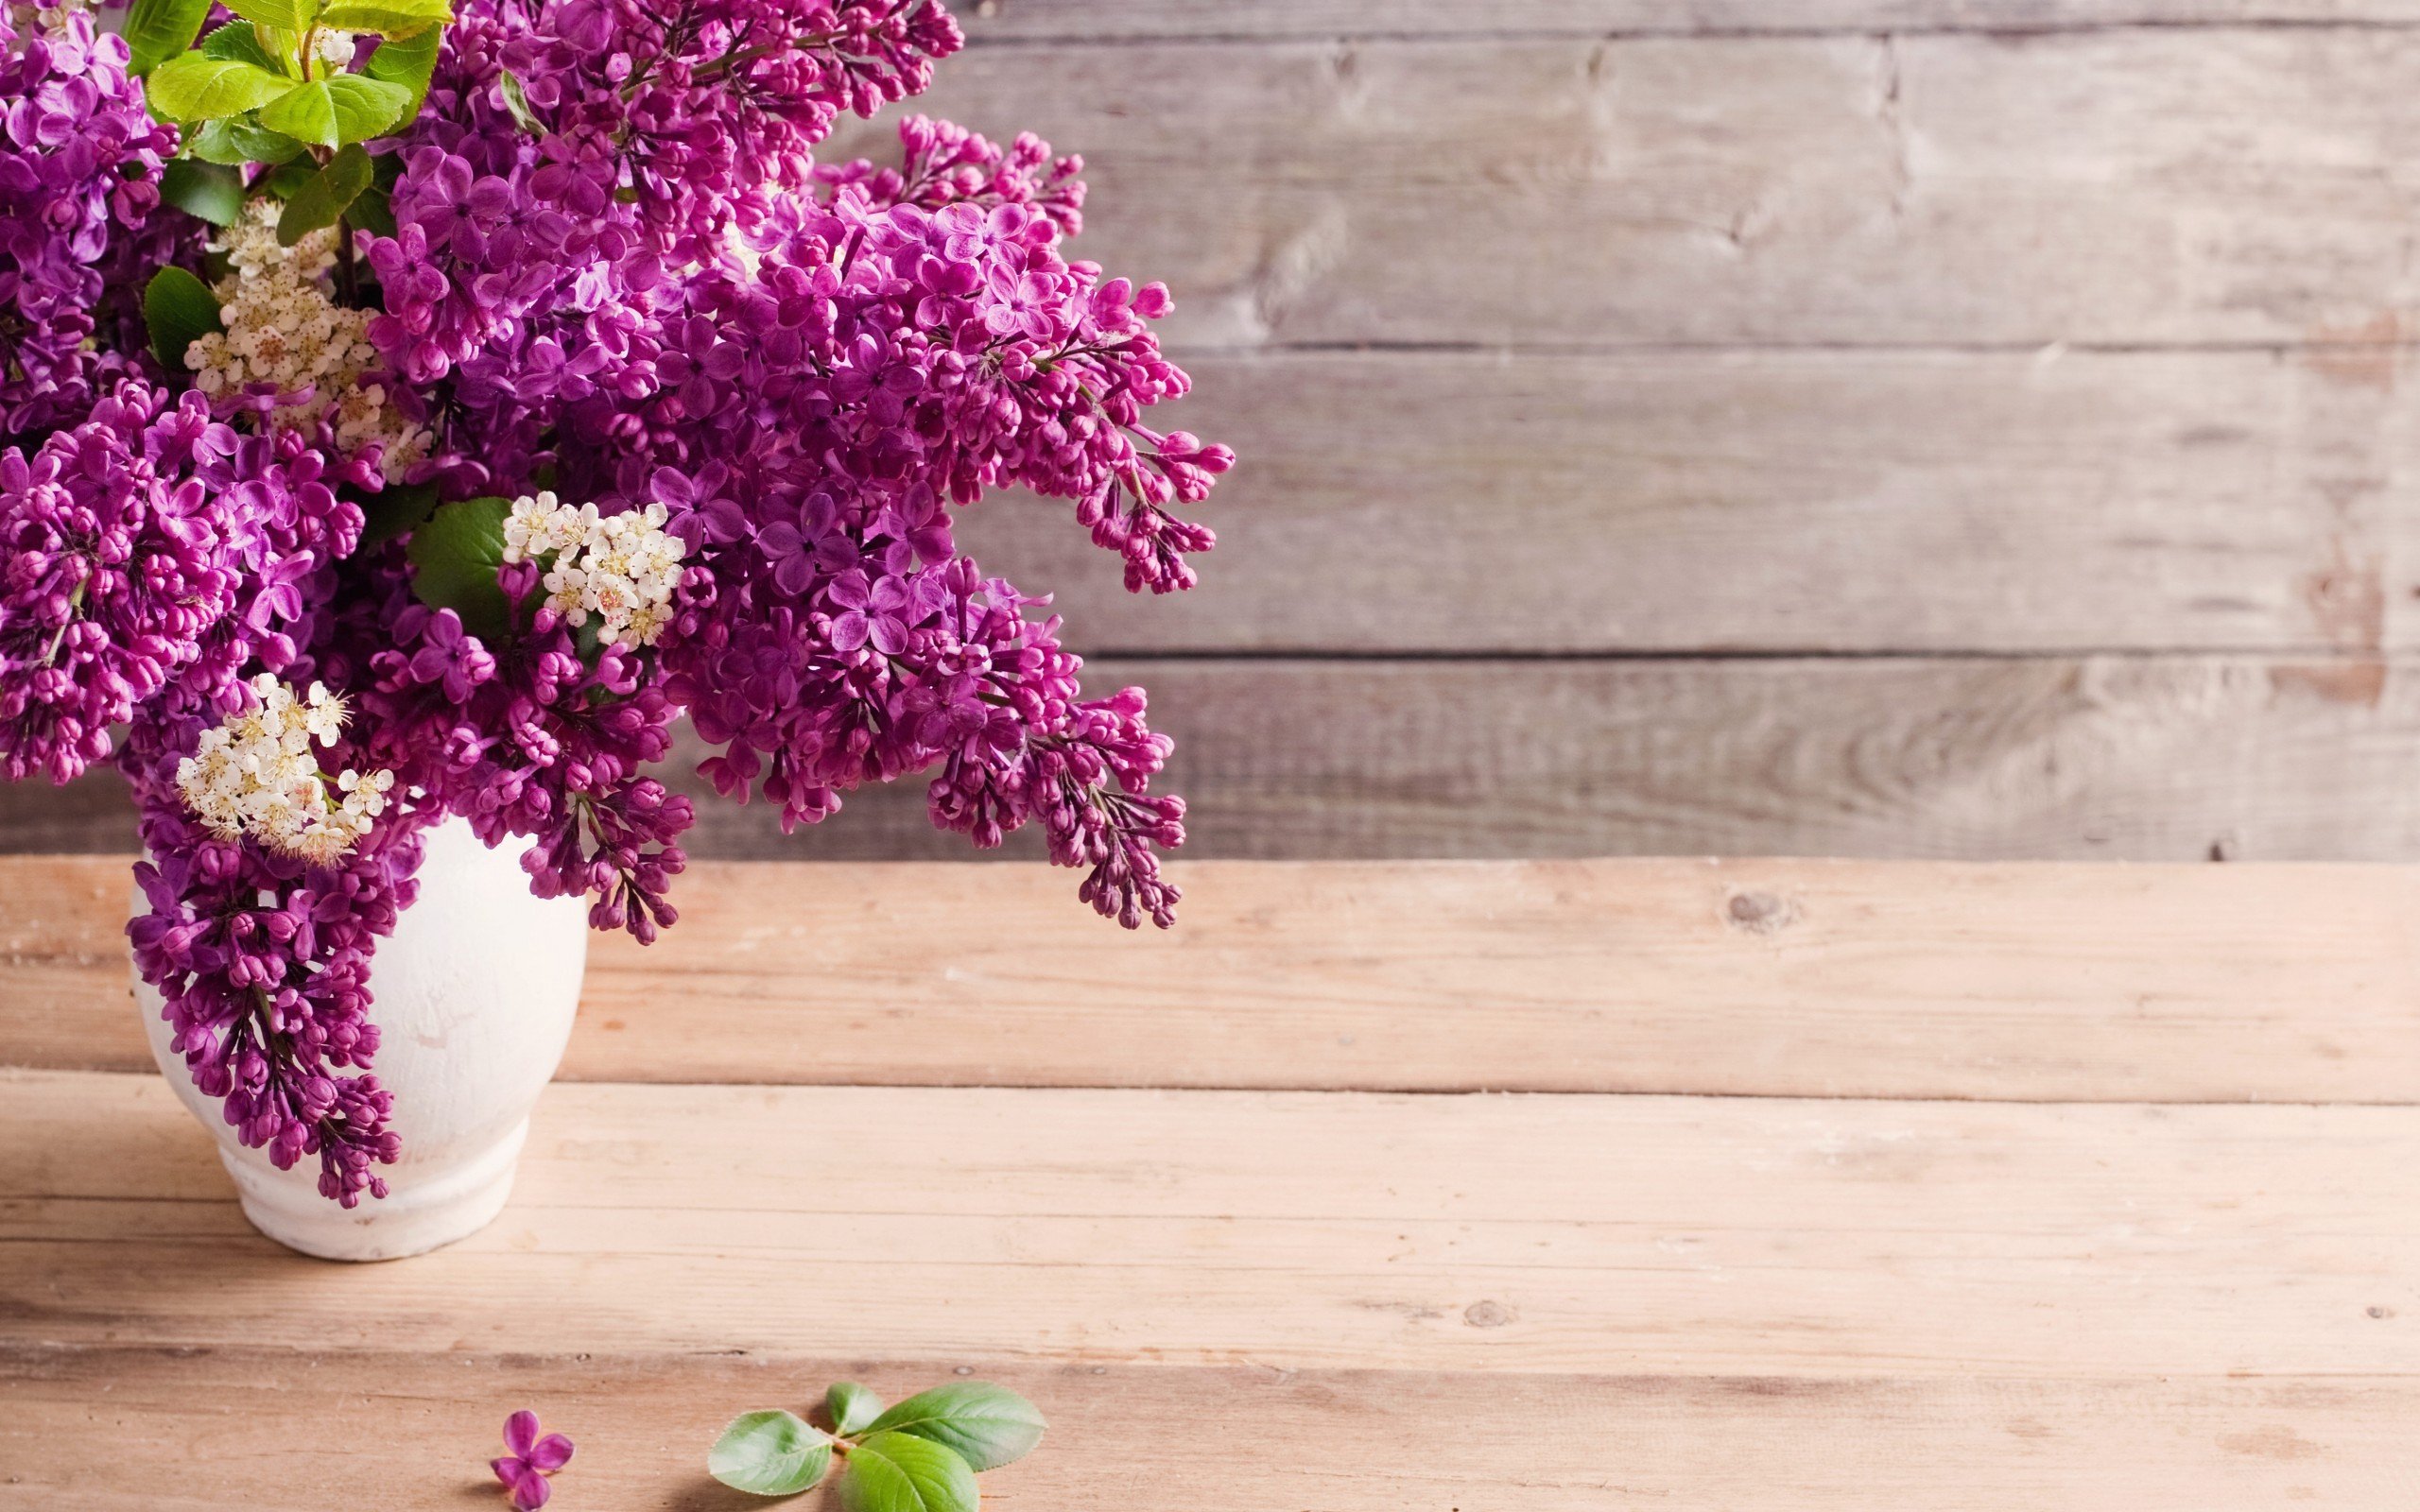 Flowers lilac vases wooden planks wallpaper 2560x1600 258907